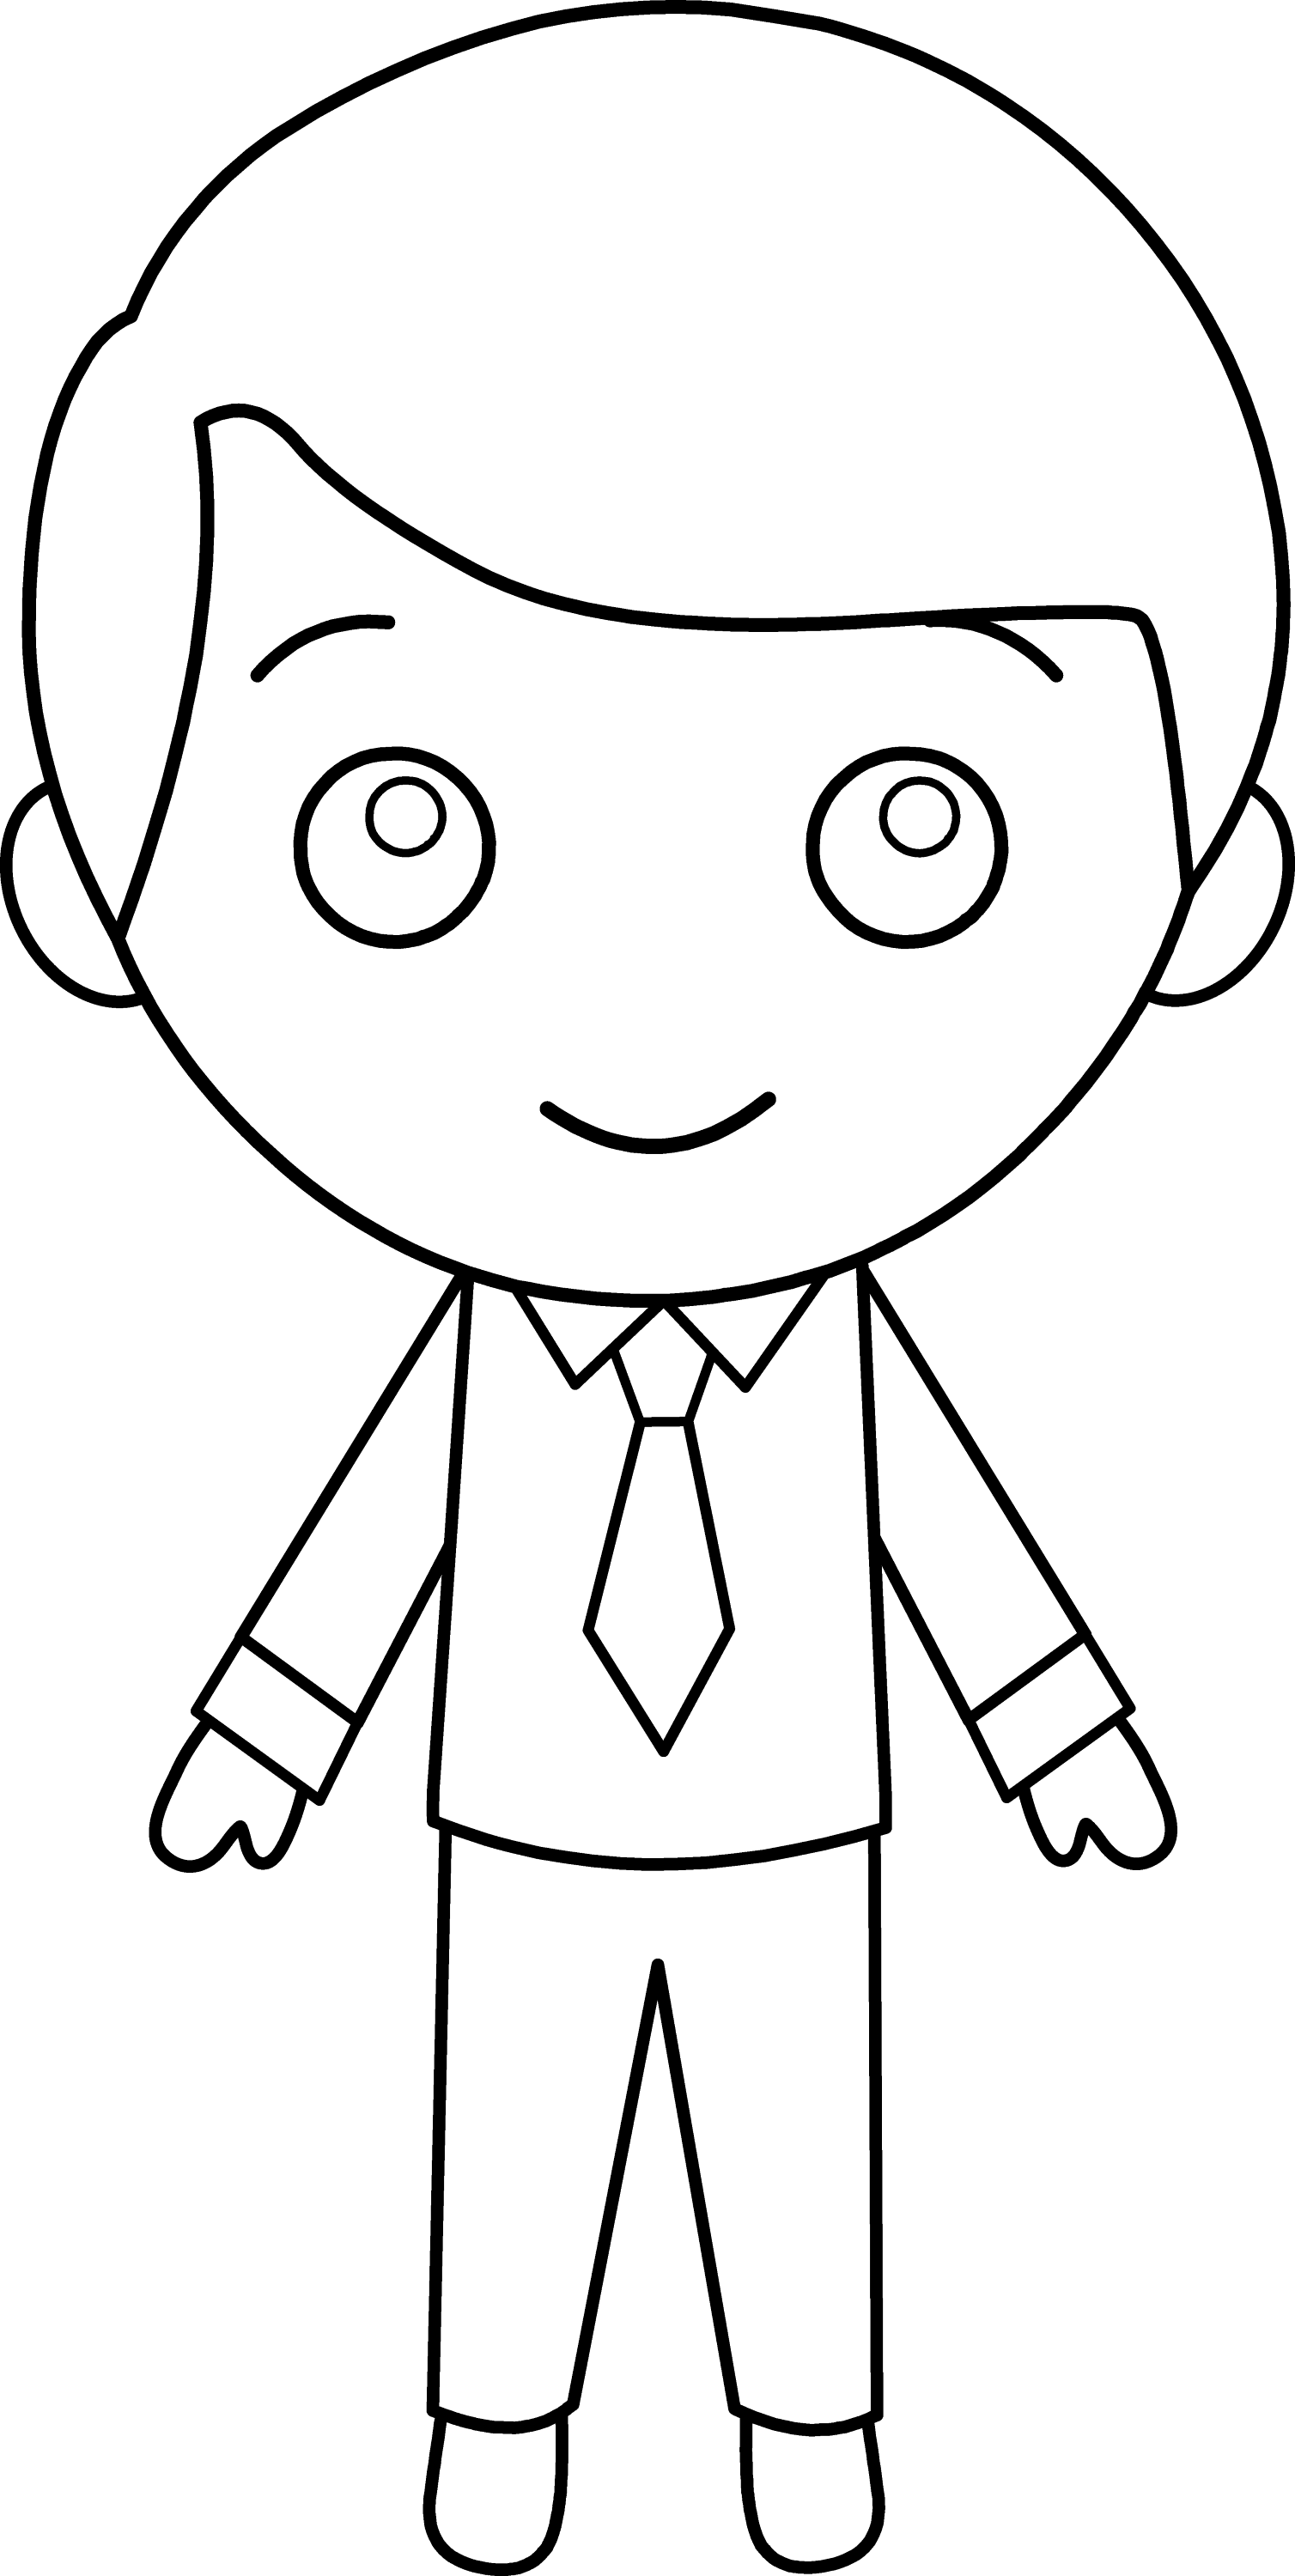 free black and white boy clipart - photo #27